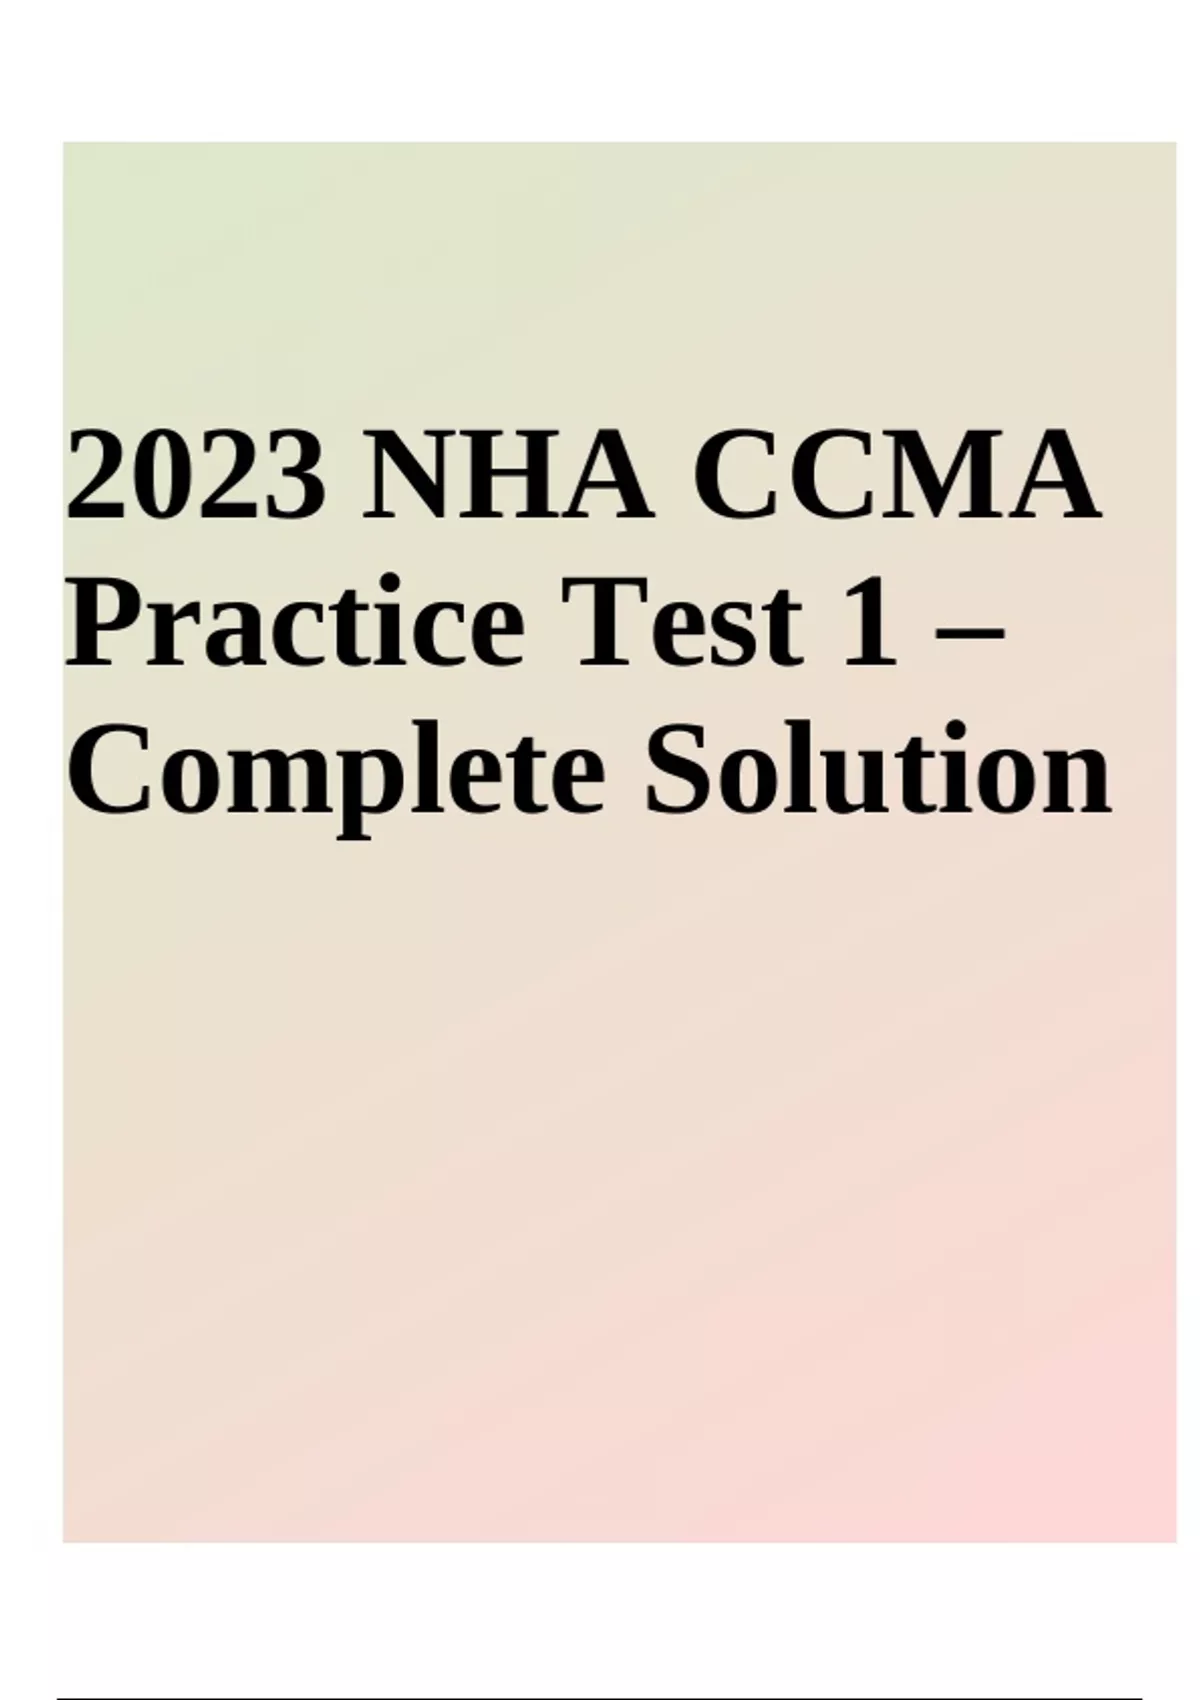 NHA CCMA Exam Practice Questions With Answers Latest Update 2023/2024